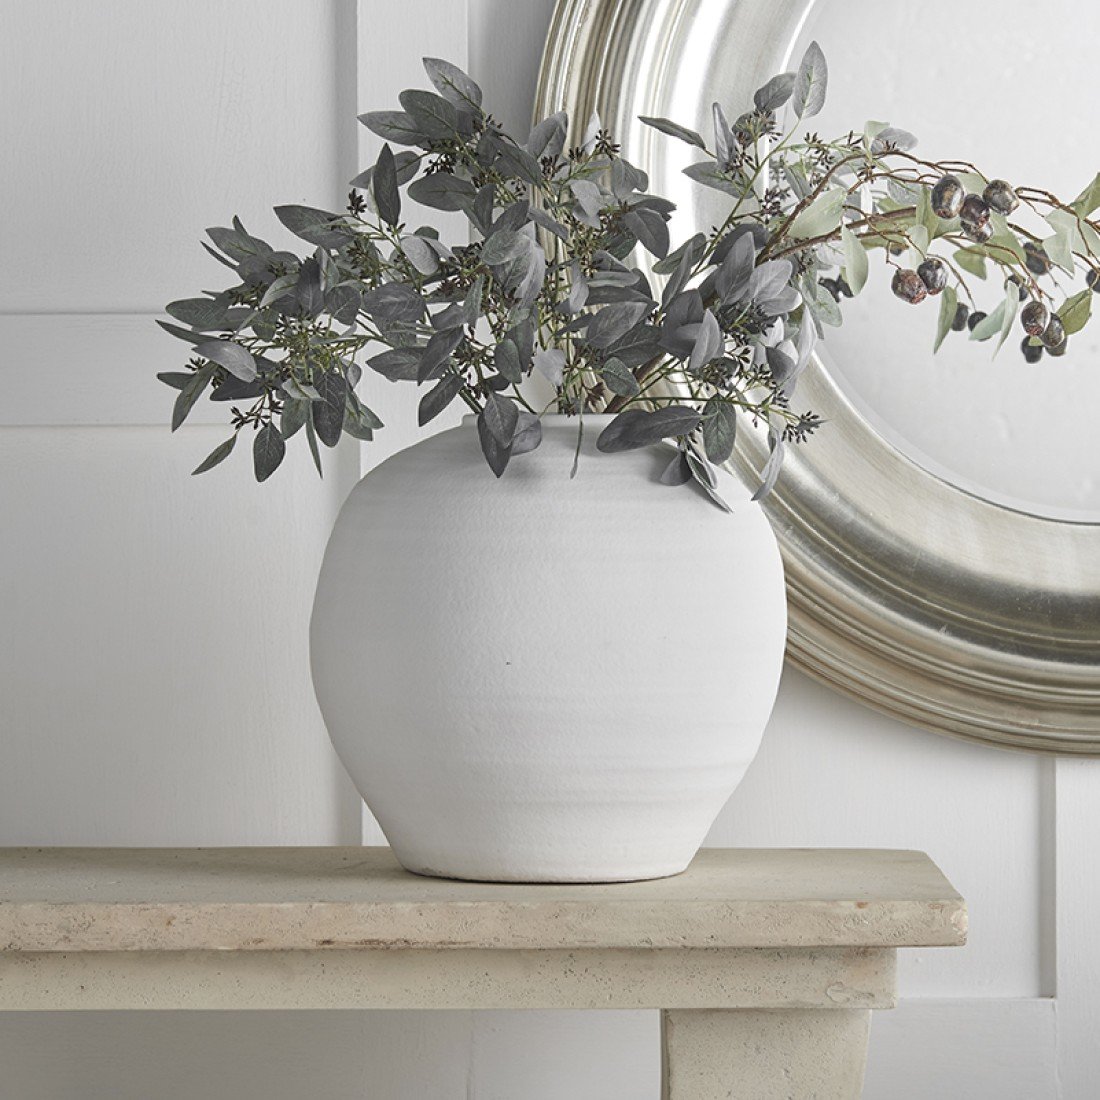 https://www.lucywillow.co.uk/image/cache/catalog/Lucy%20Willow/Accessories/Vases/VASE%202_JUNE%20XL-1100x1100.jpg